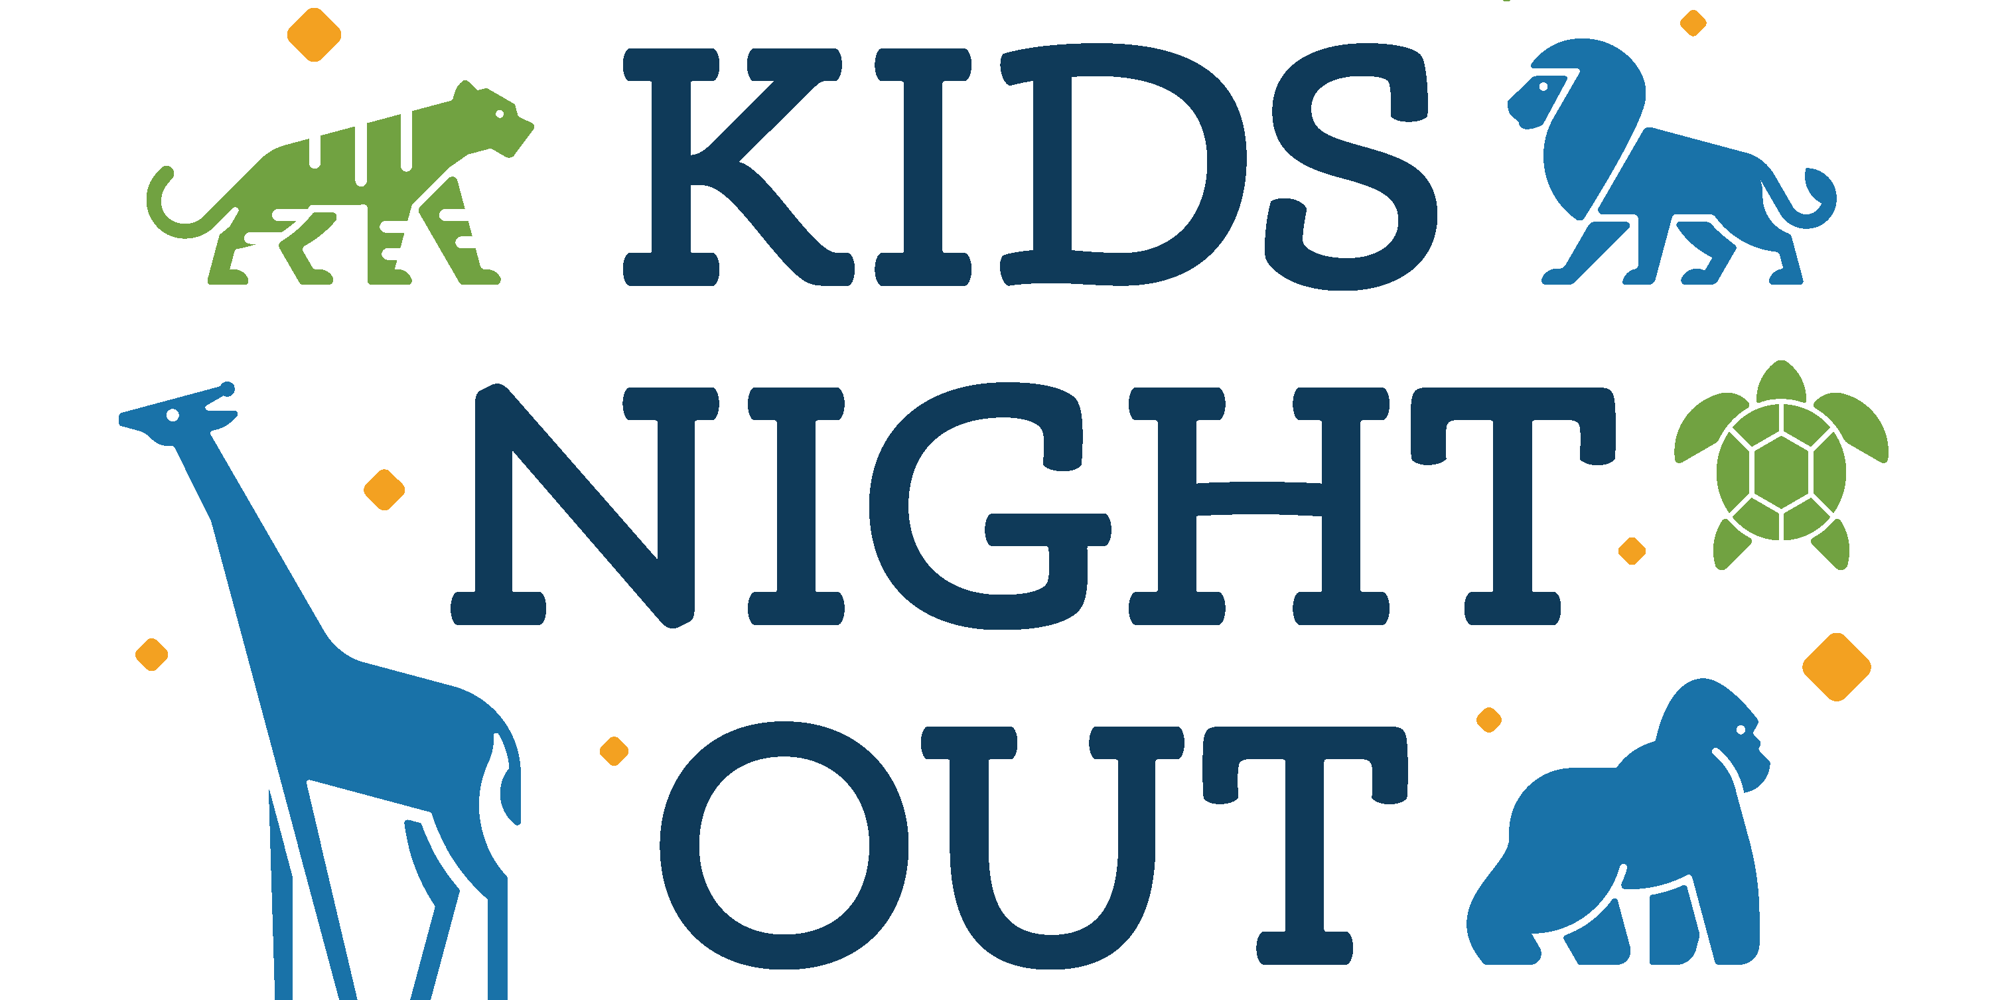 Kids Night Out promotional image